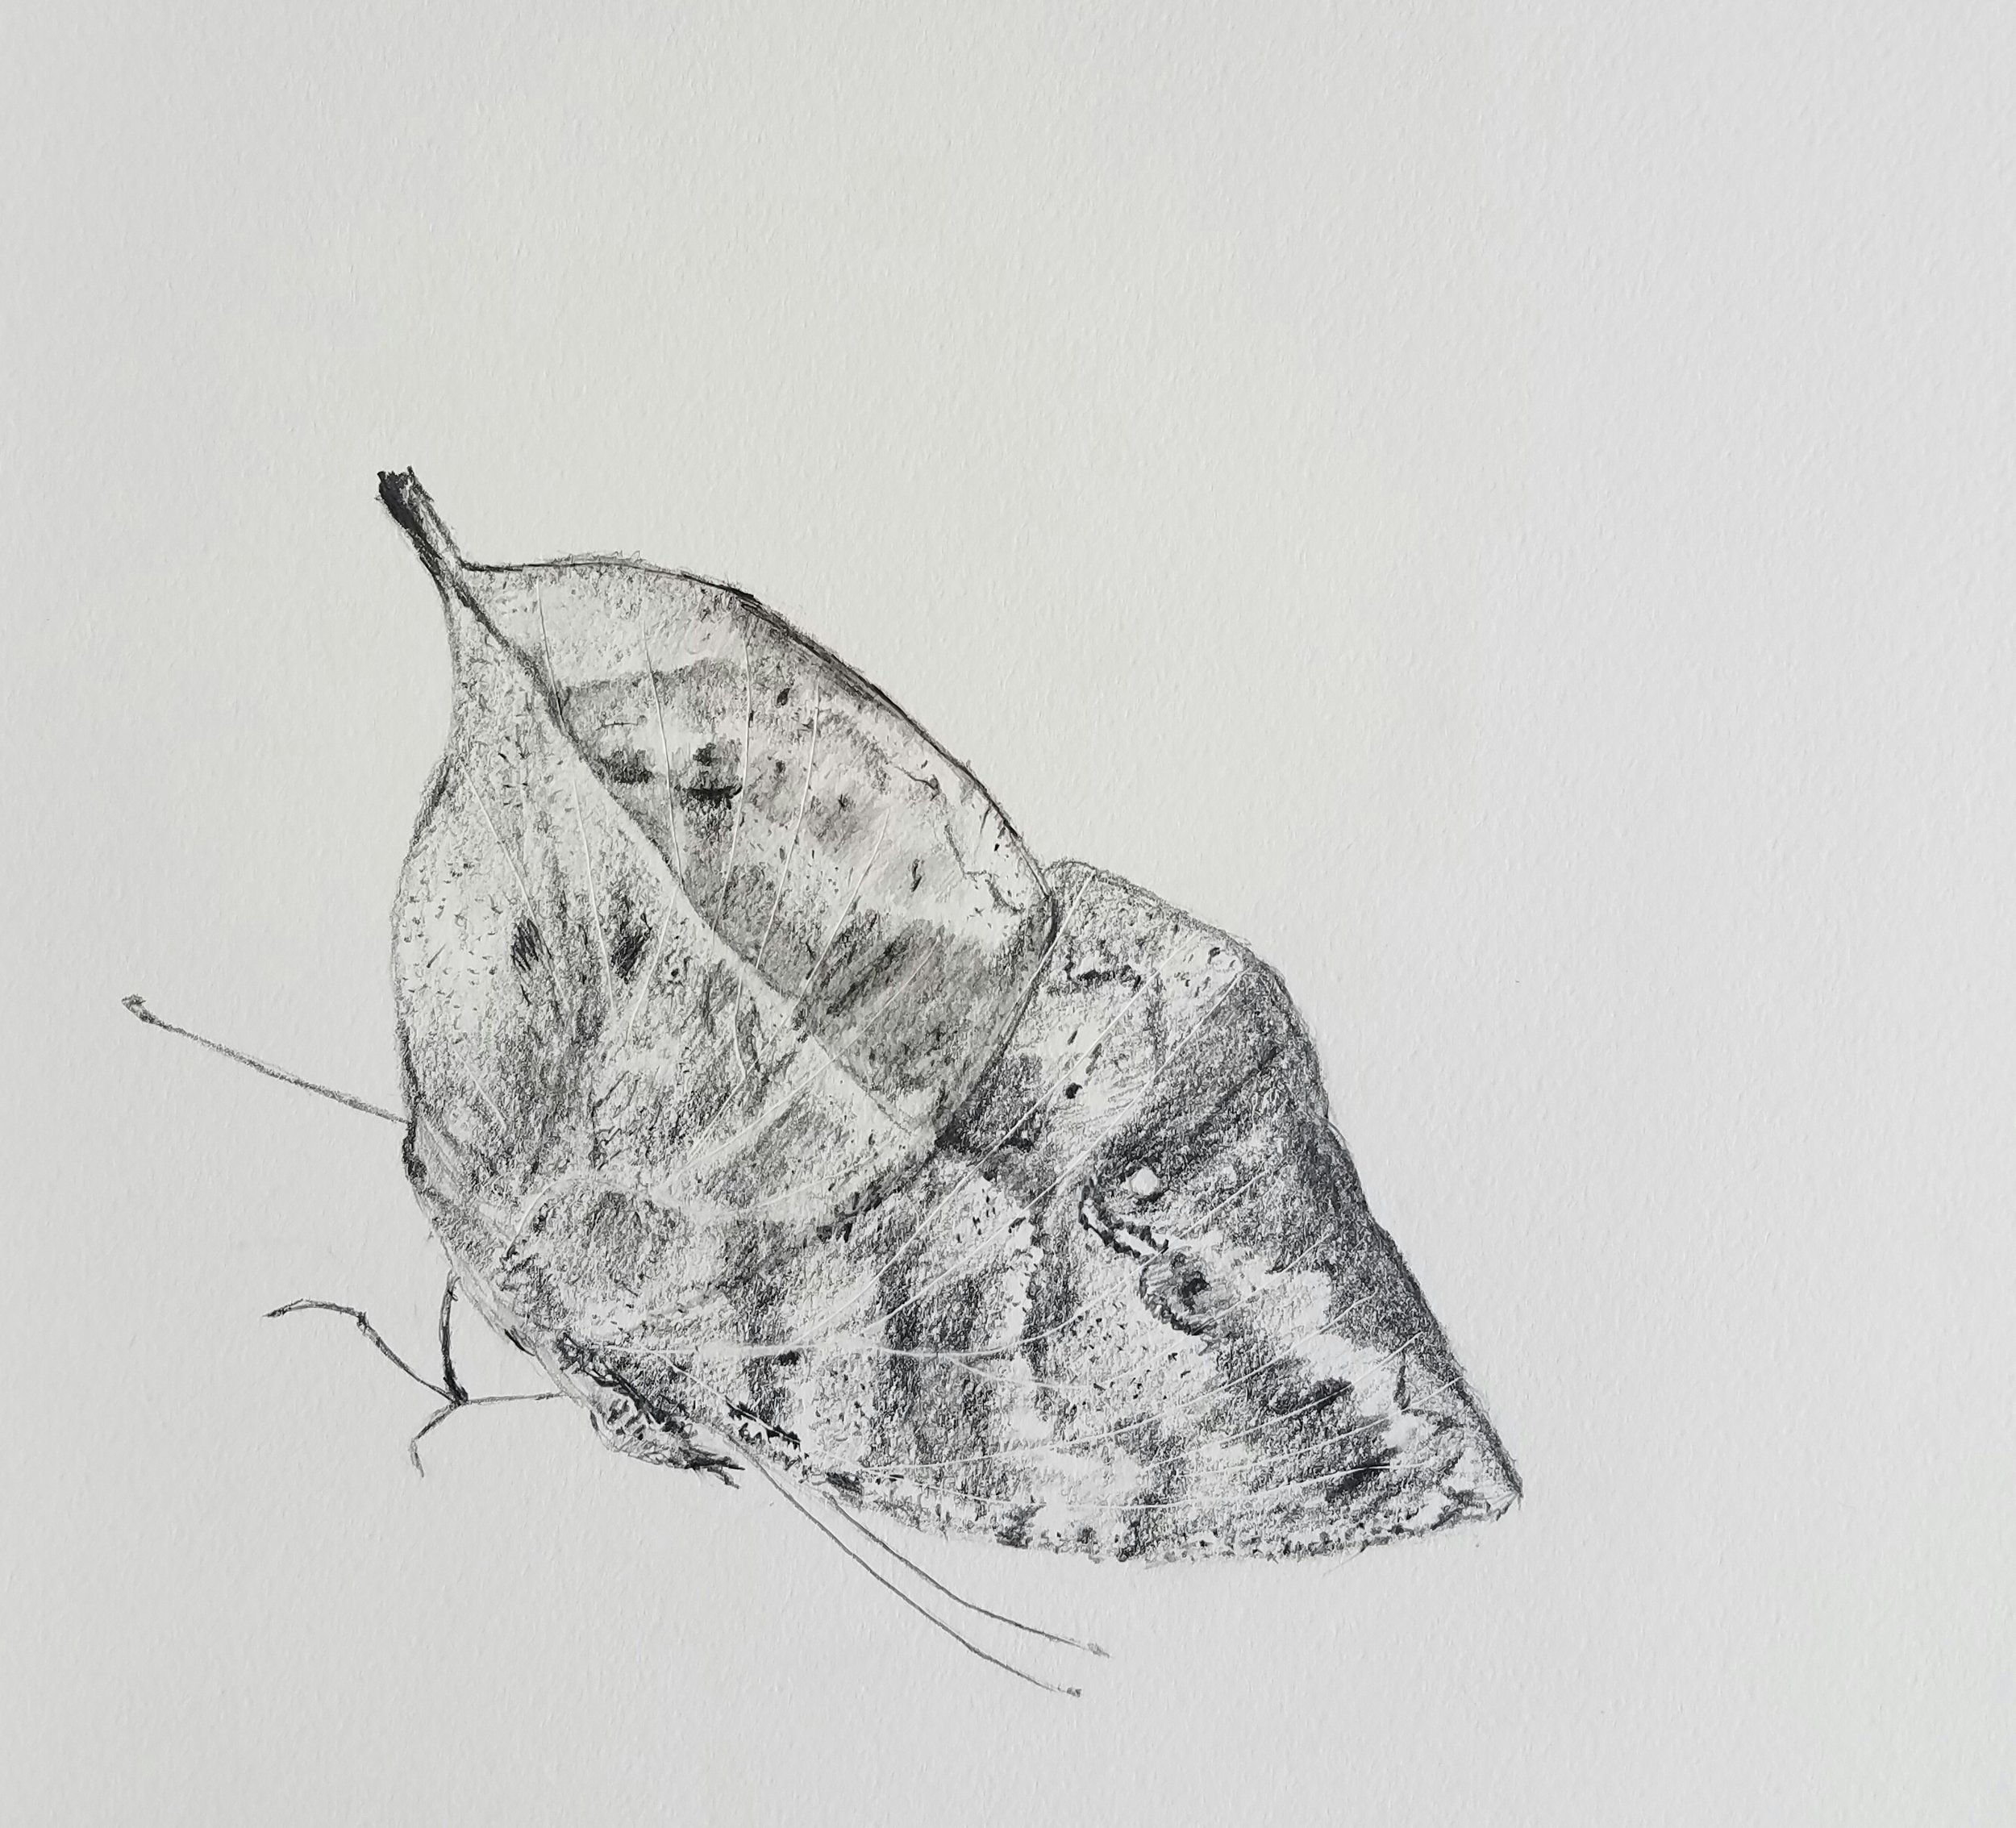 Indian Leaf Butterfly, graphite, 2017